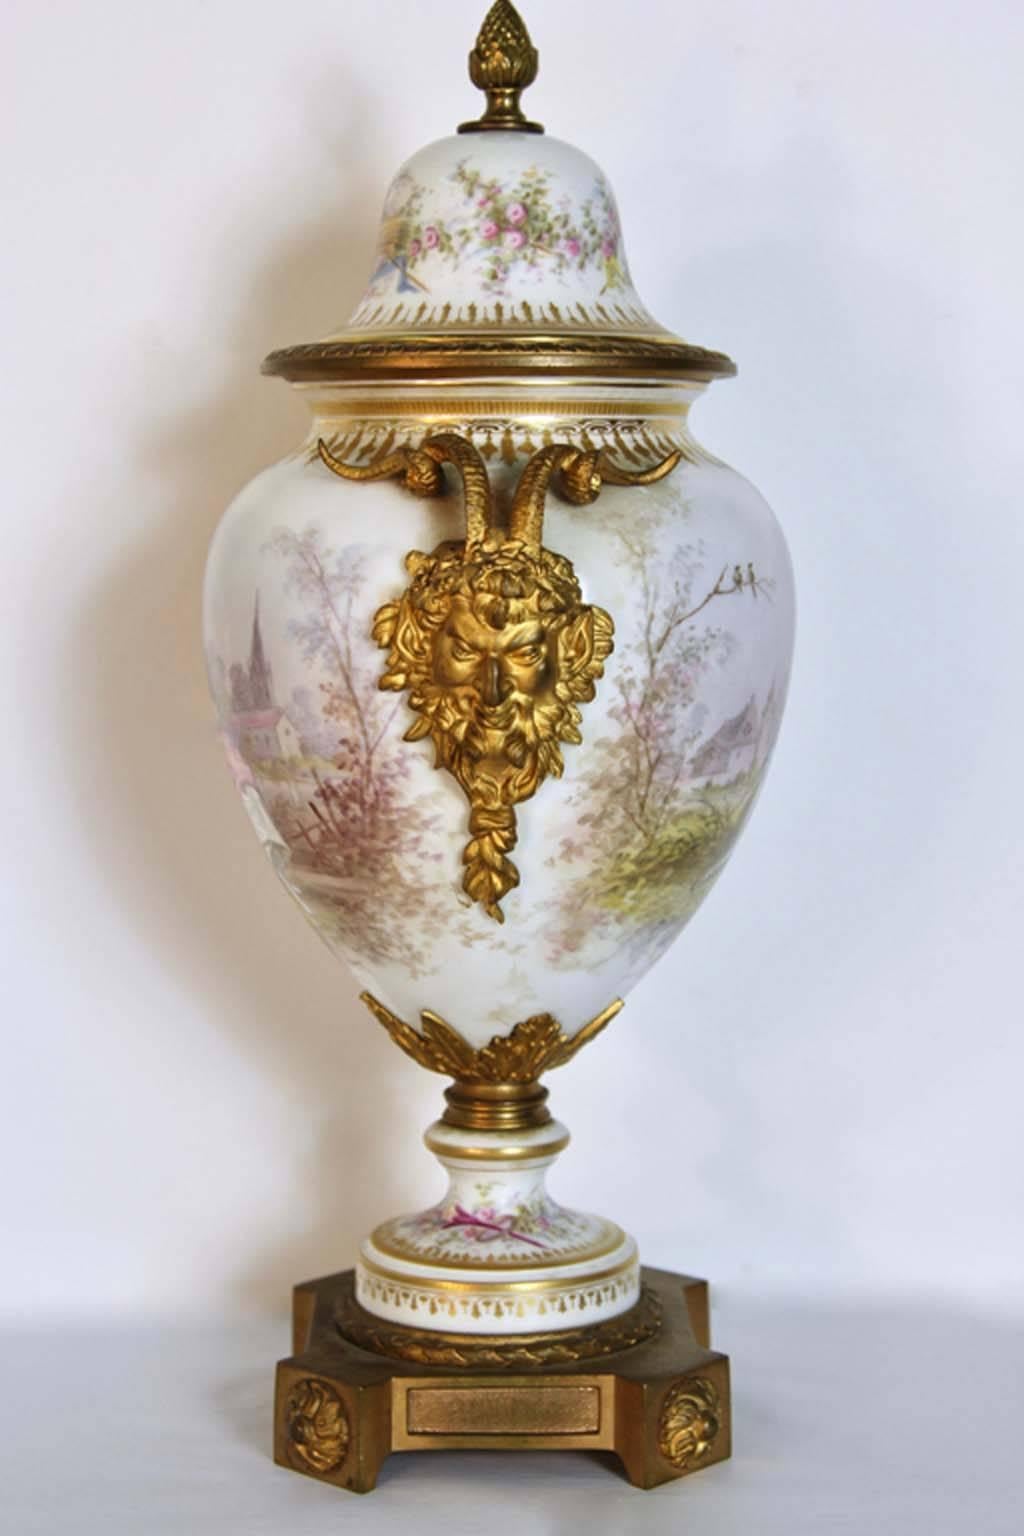 A fine antique Sevres urn, circa 1880 with gilt dore bronze ormolu mounts. Having romantic hand painted decorations on both sides with a revolving body so both sides can be viewed.